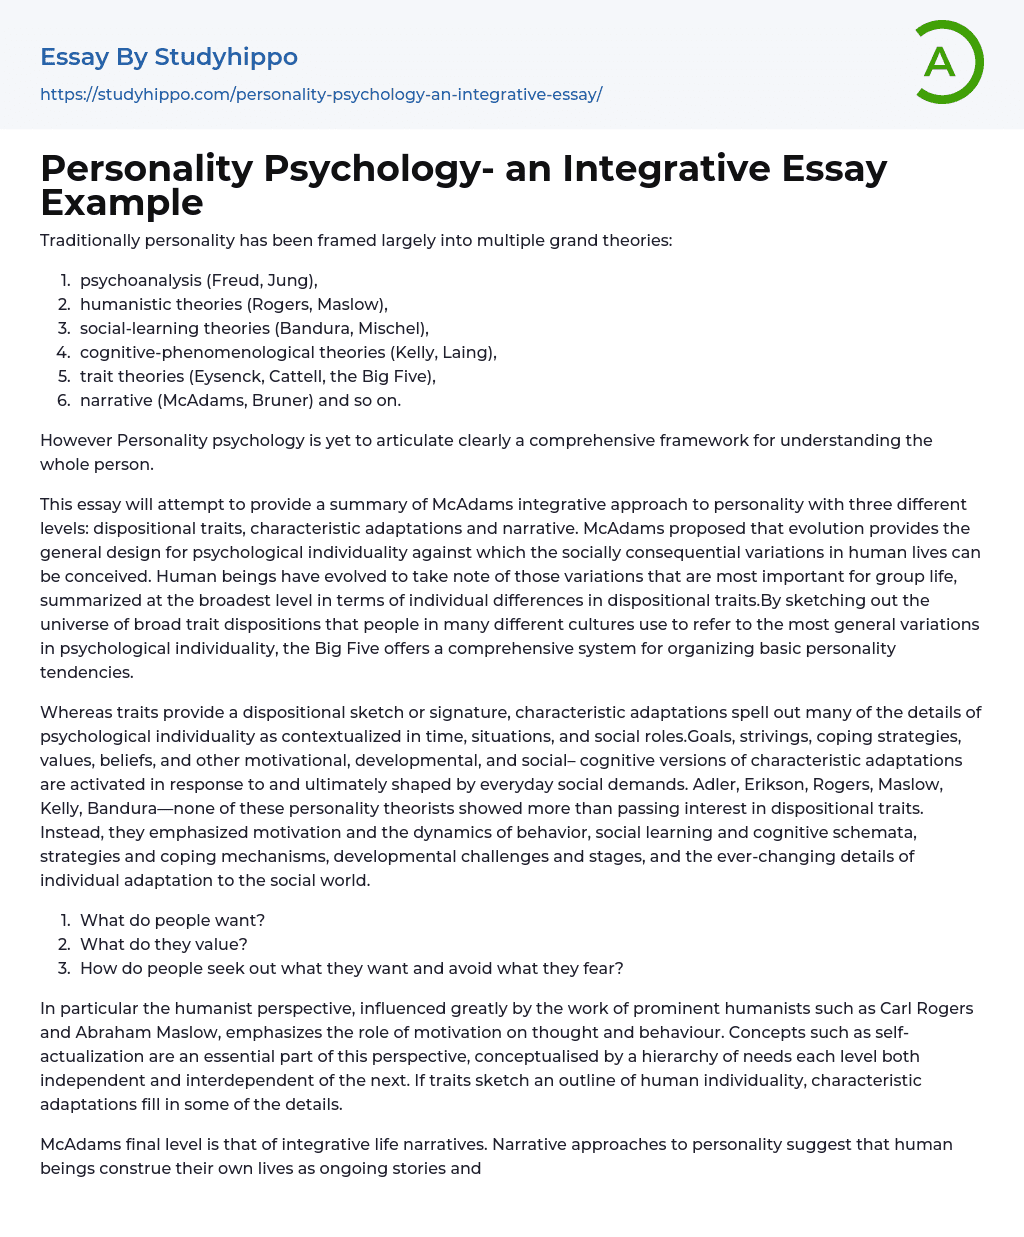 Personality Psychology- an Integrative Essay Example